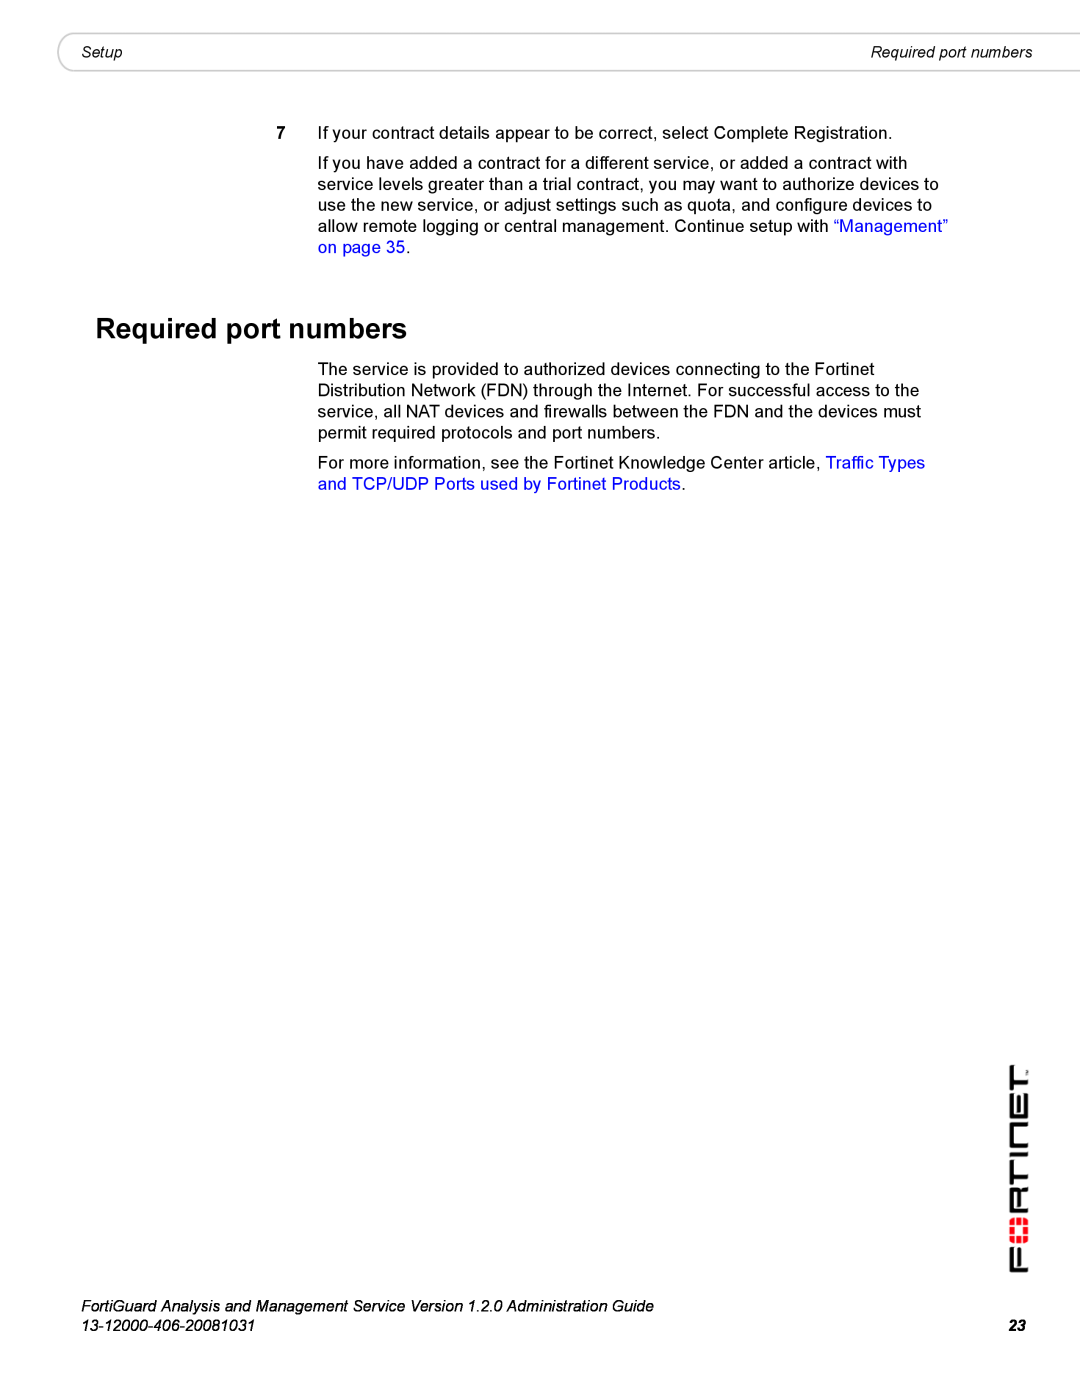 Fortinet 1.2.0 manual Required port numbers 